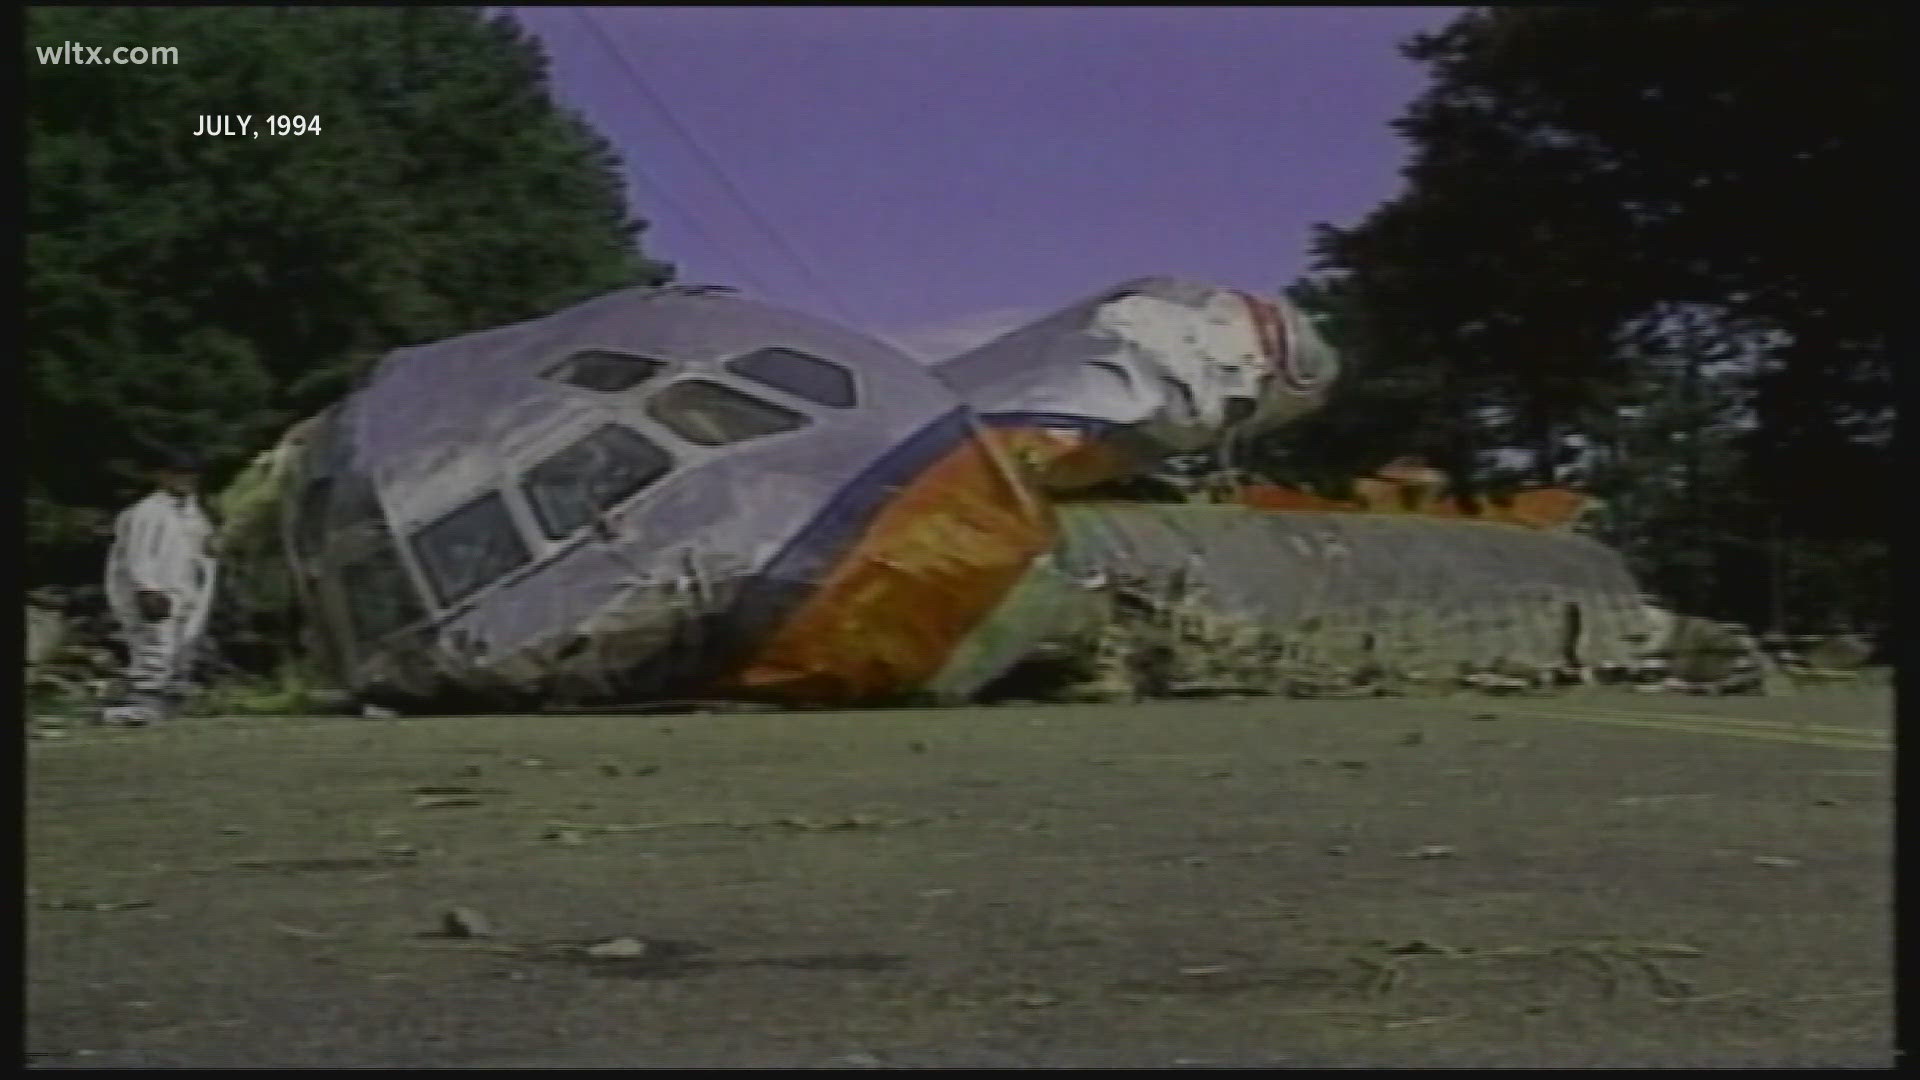 The flight originated out of Columbia and crashed on the way to Charlotte. Thirty-seven people were killed.